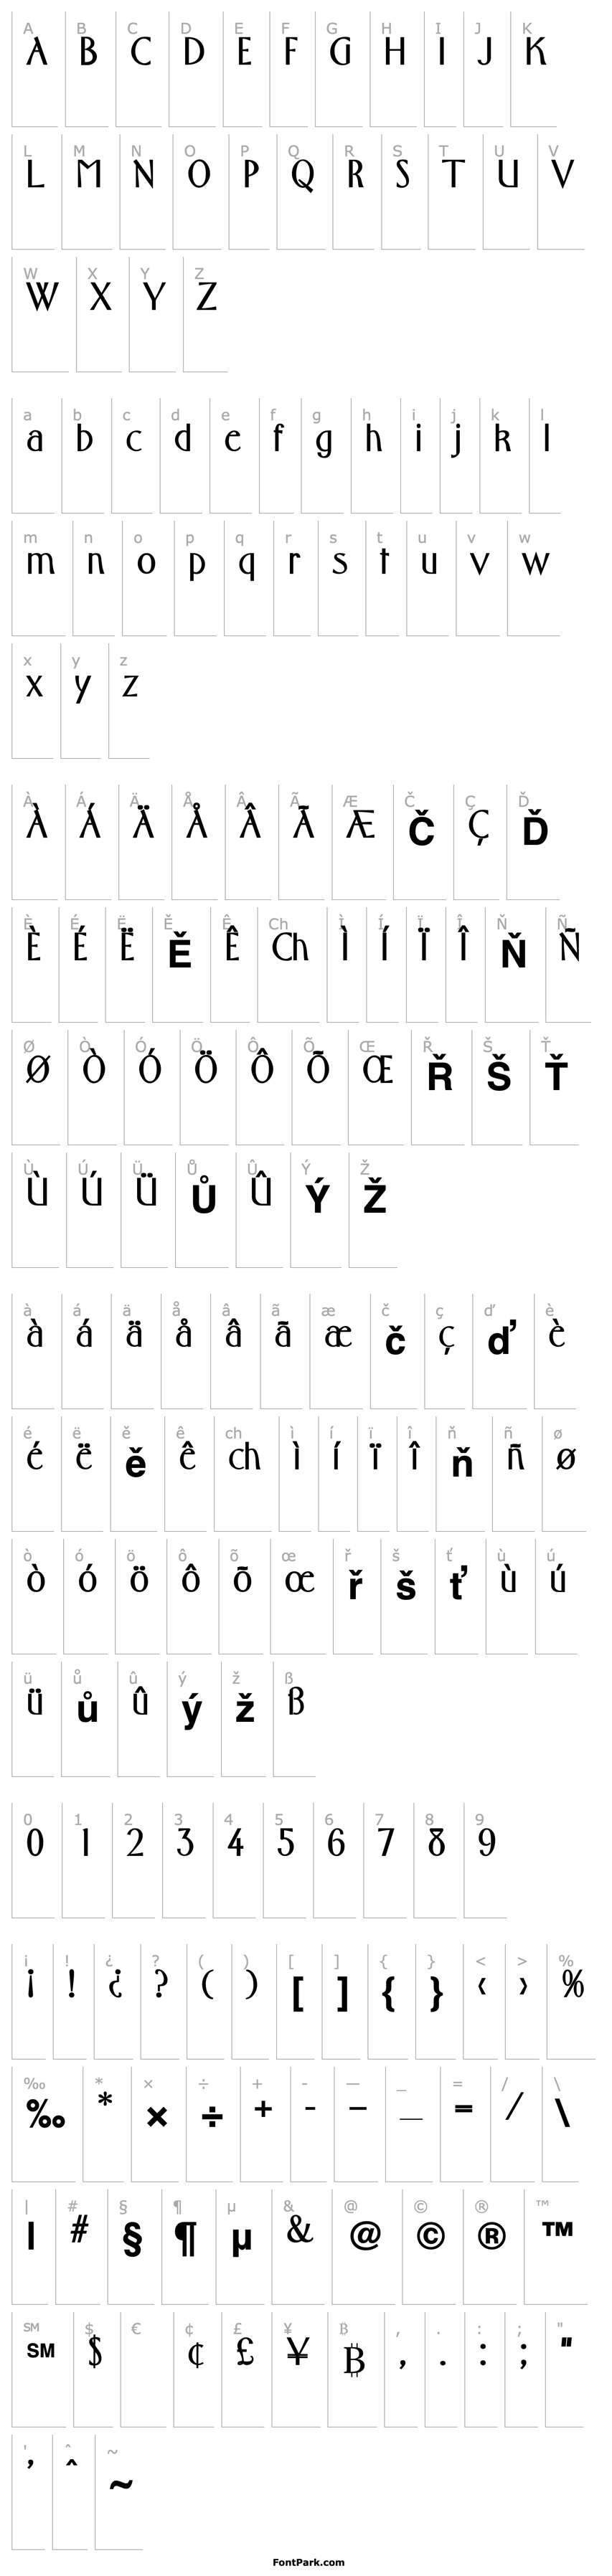 Overview font149